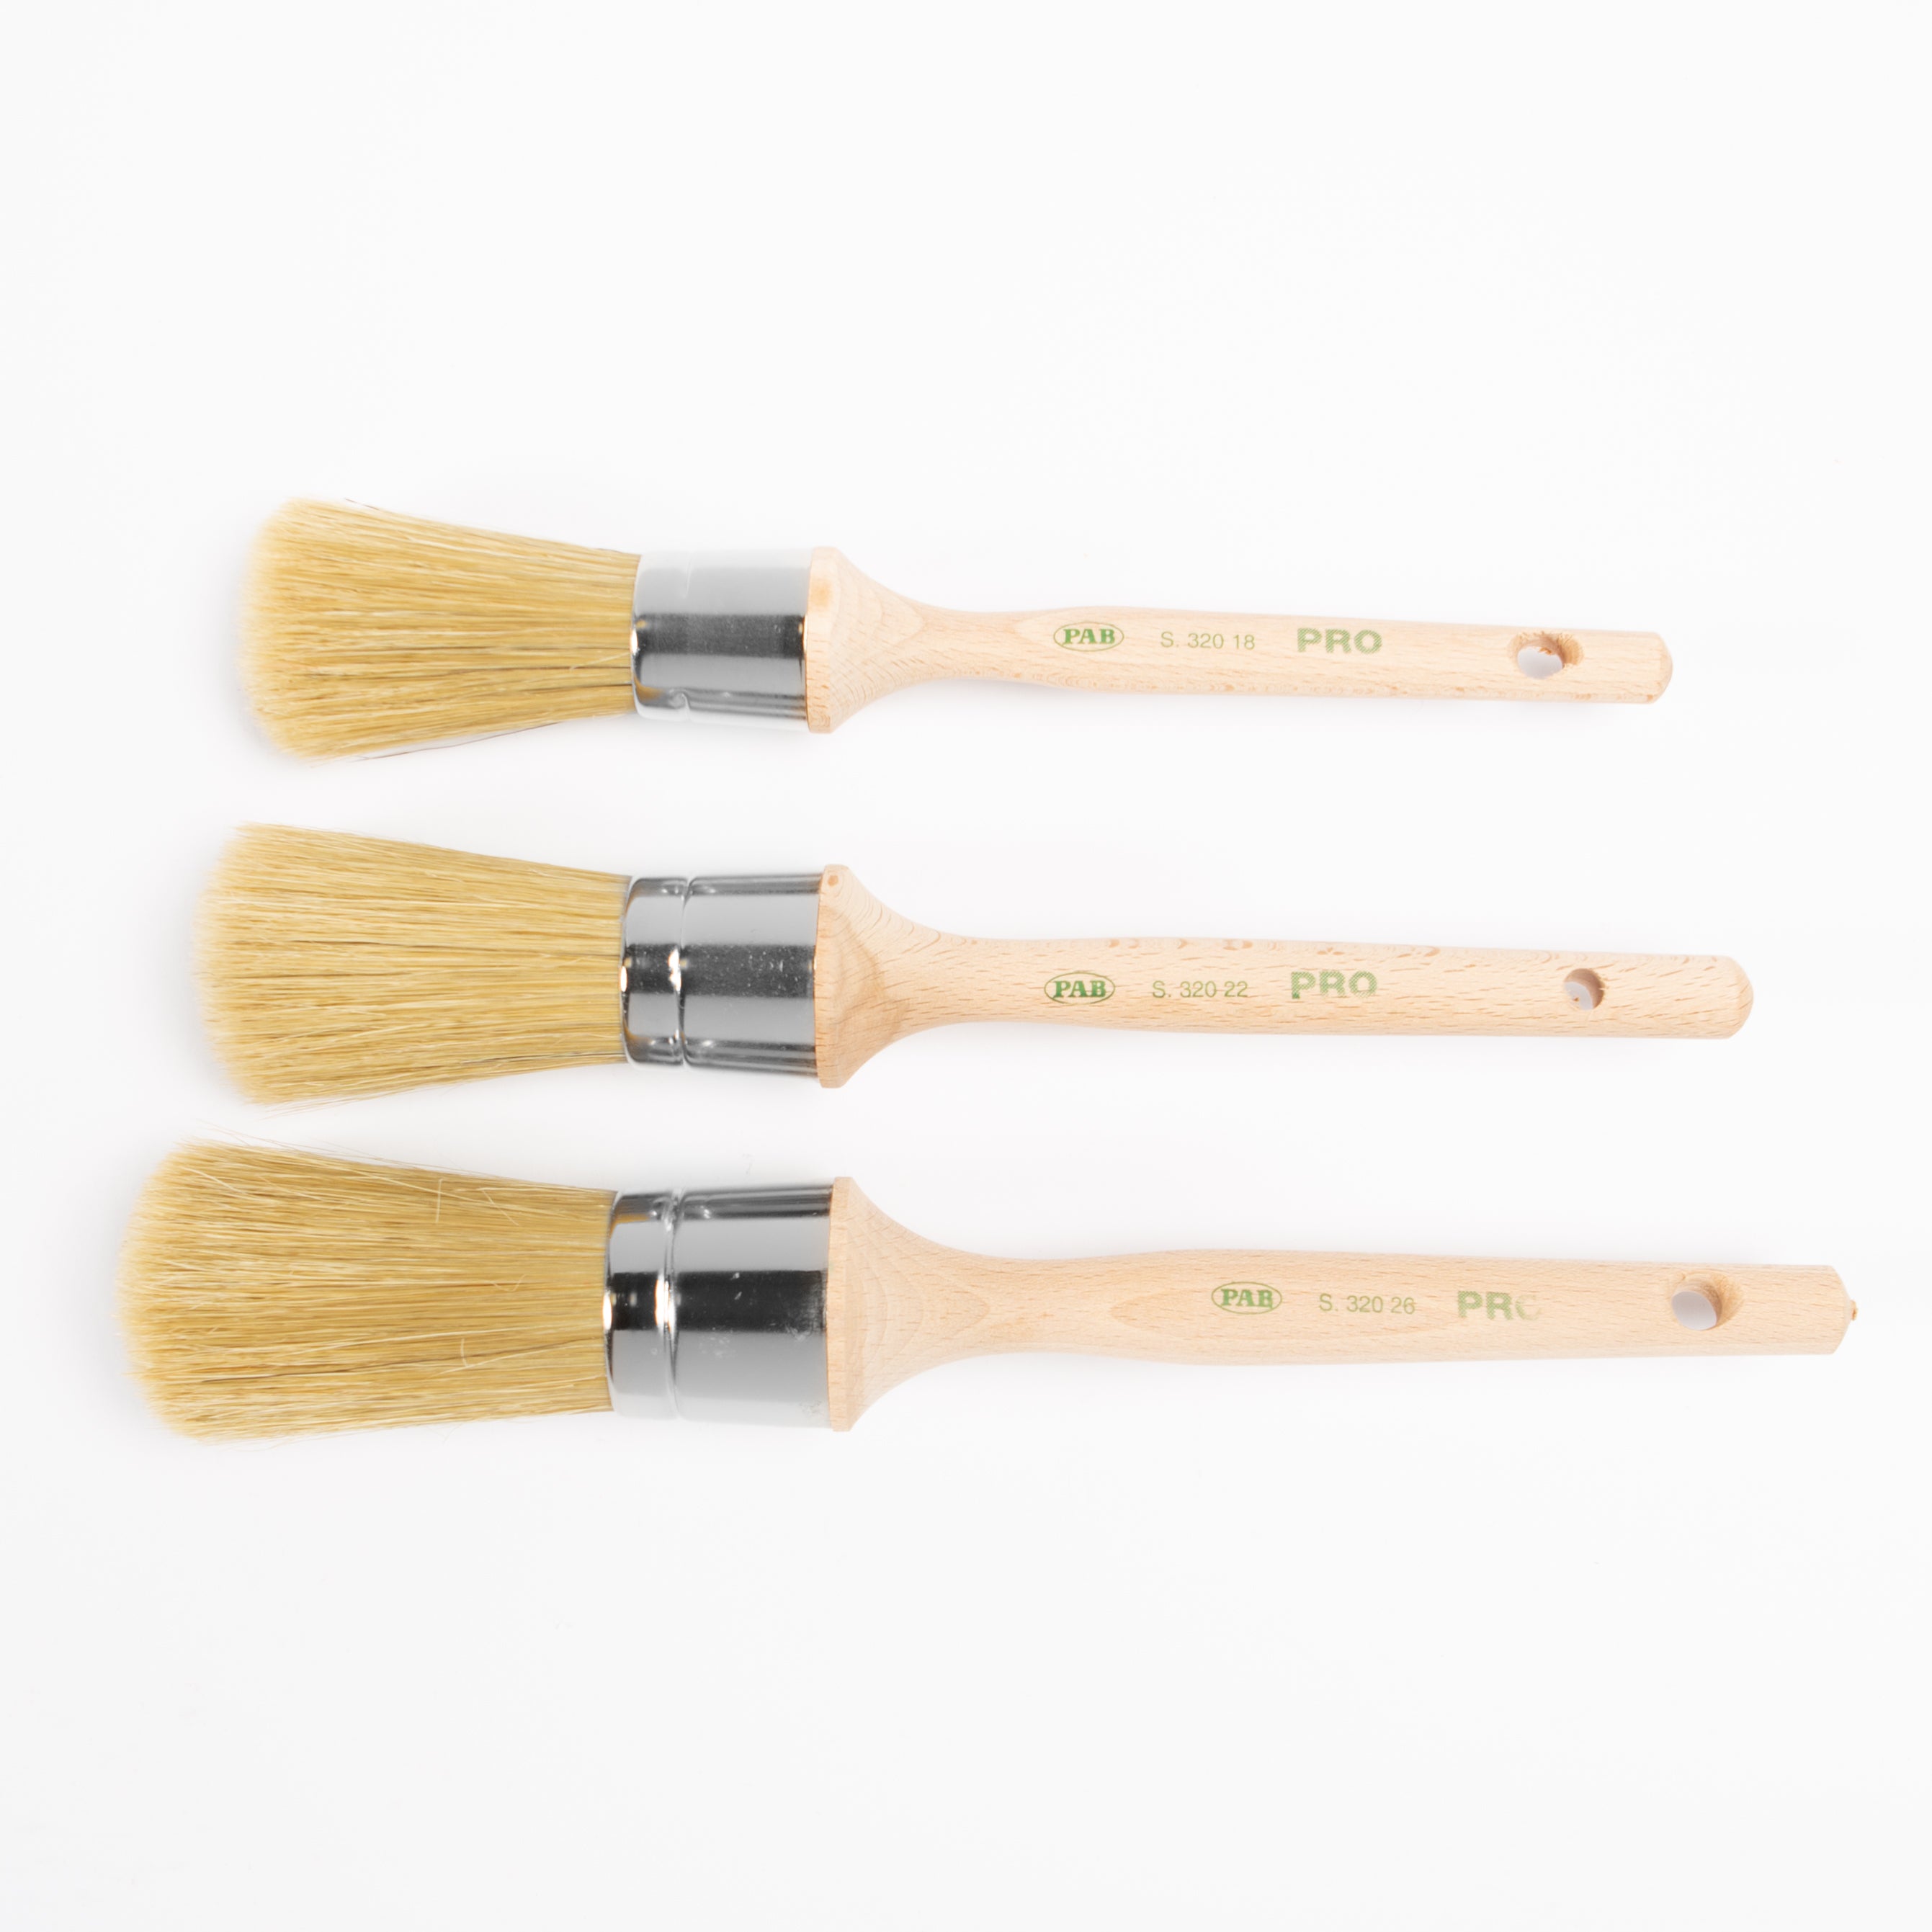 PAB "Strozzato" Pure Bristle, Round, Extra Long Raw Wooden Handle Brush